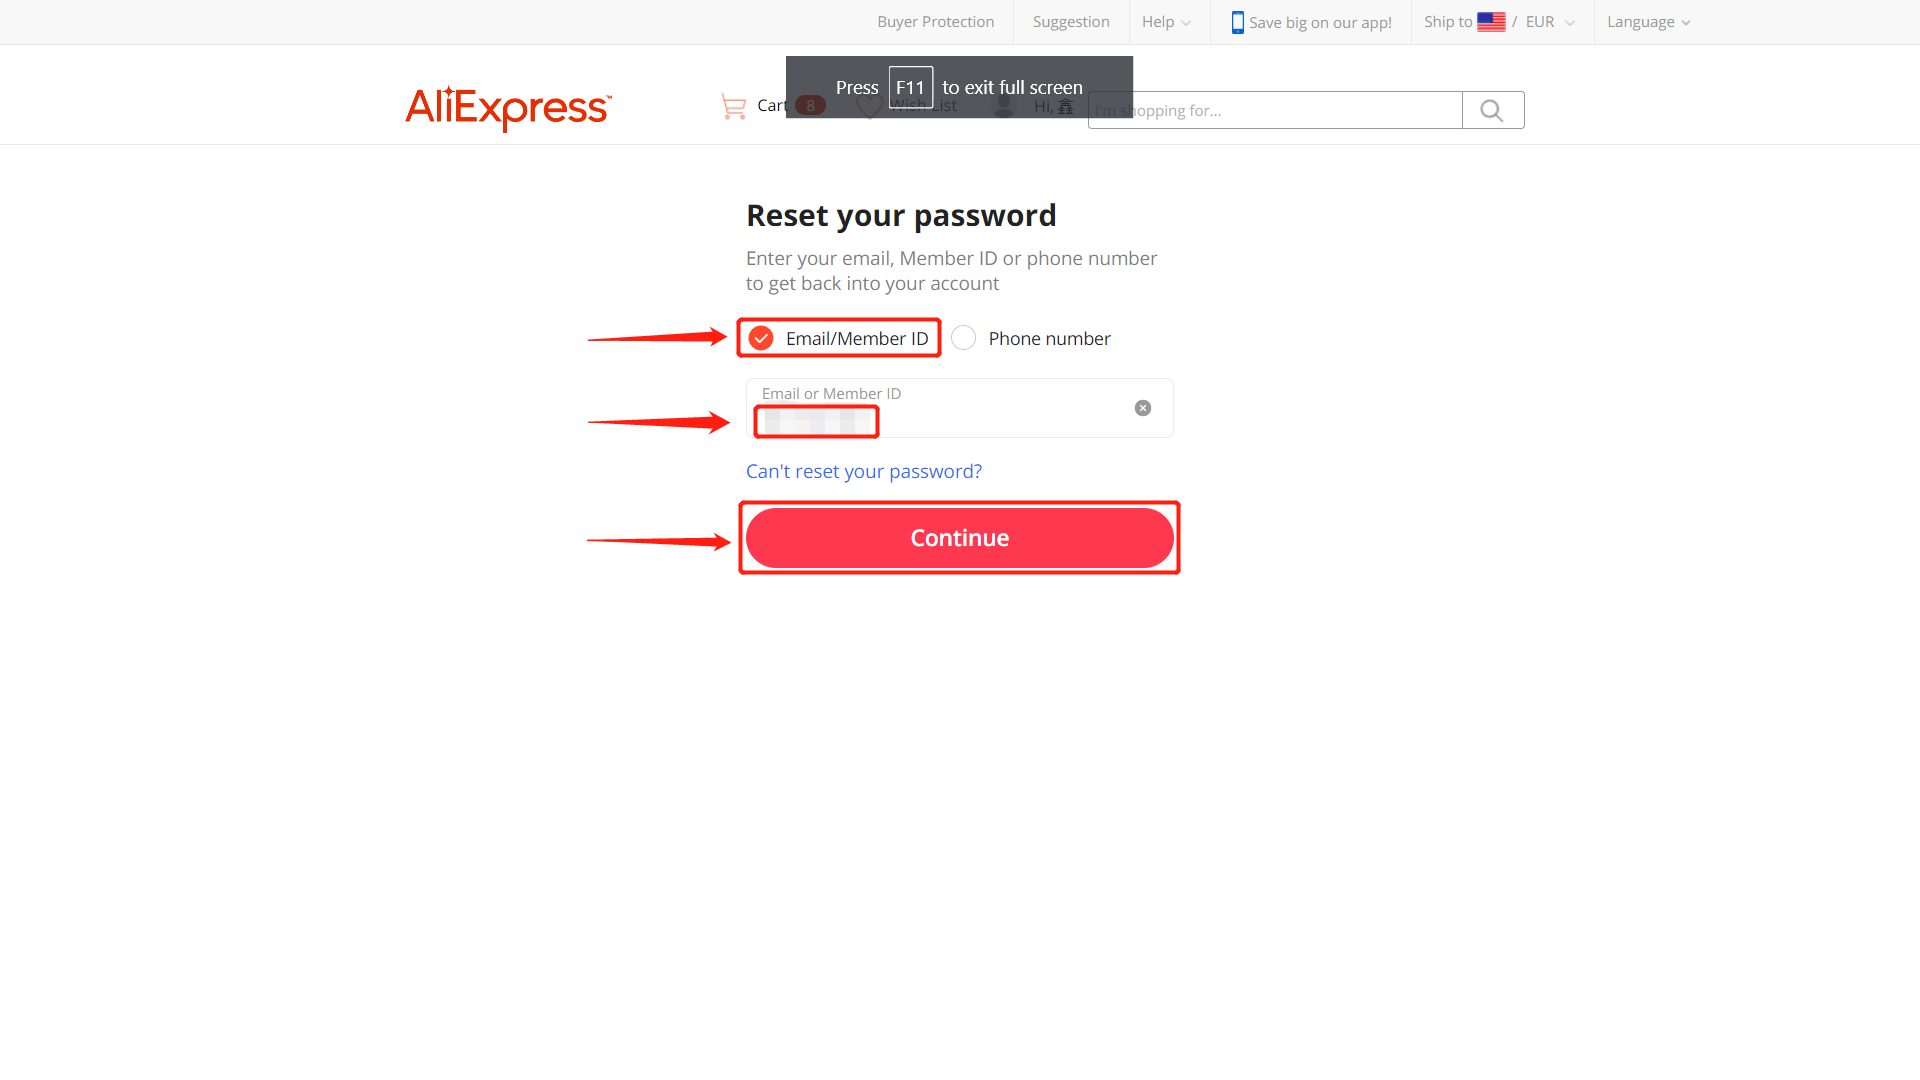 Check your AliExpress email via AliExpress Account ID - Enter your Member ID - DSers